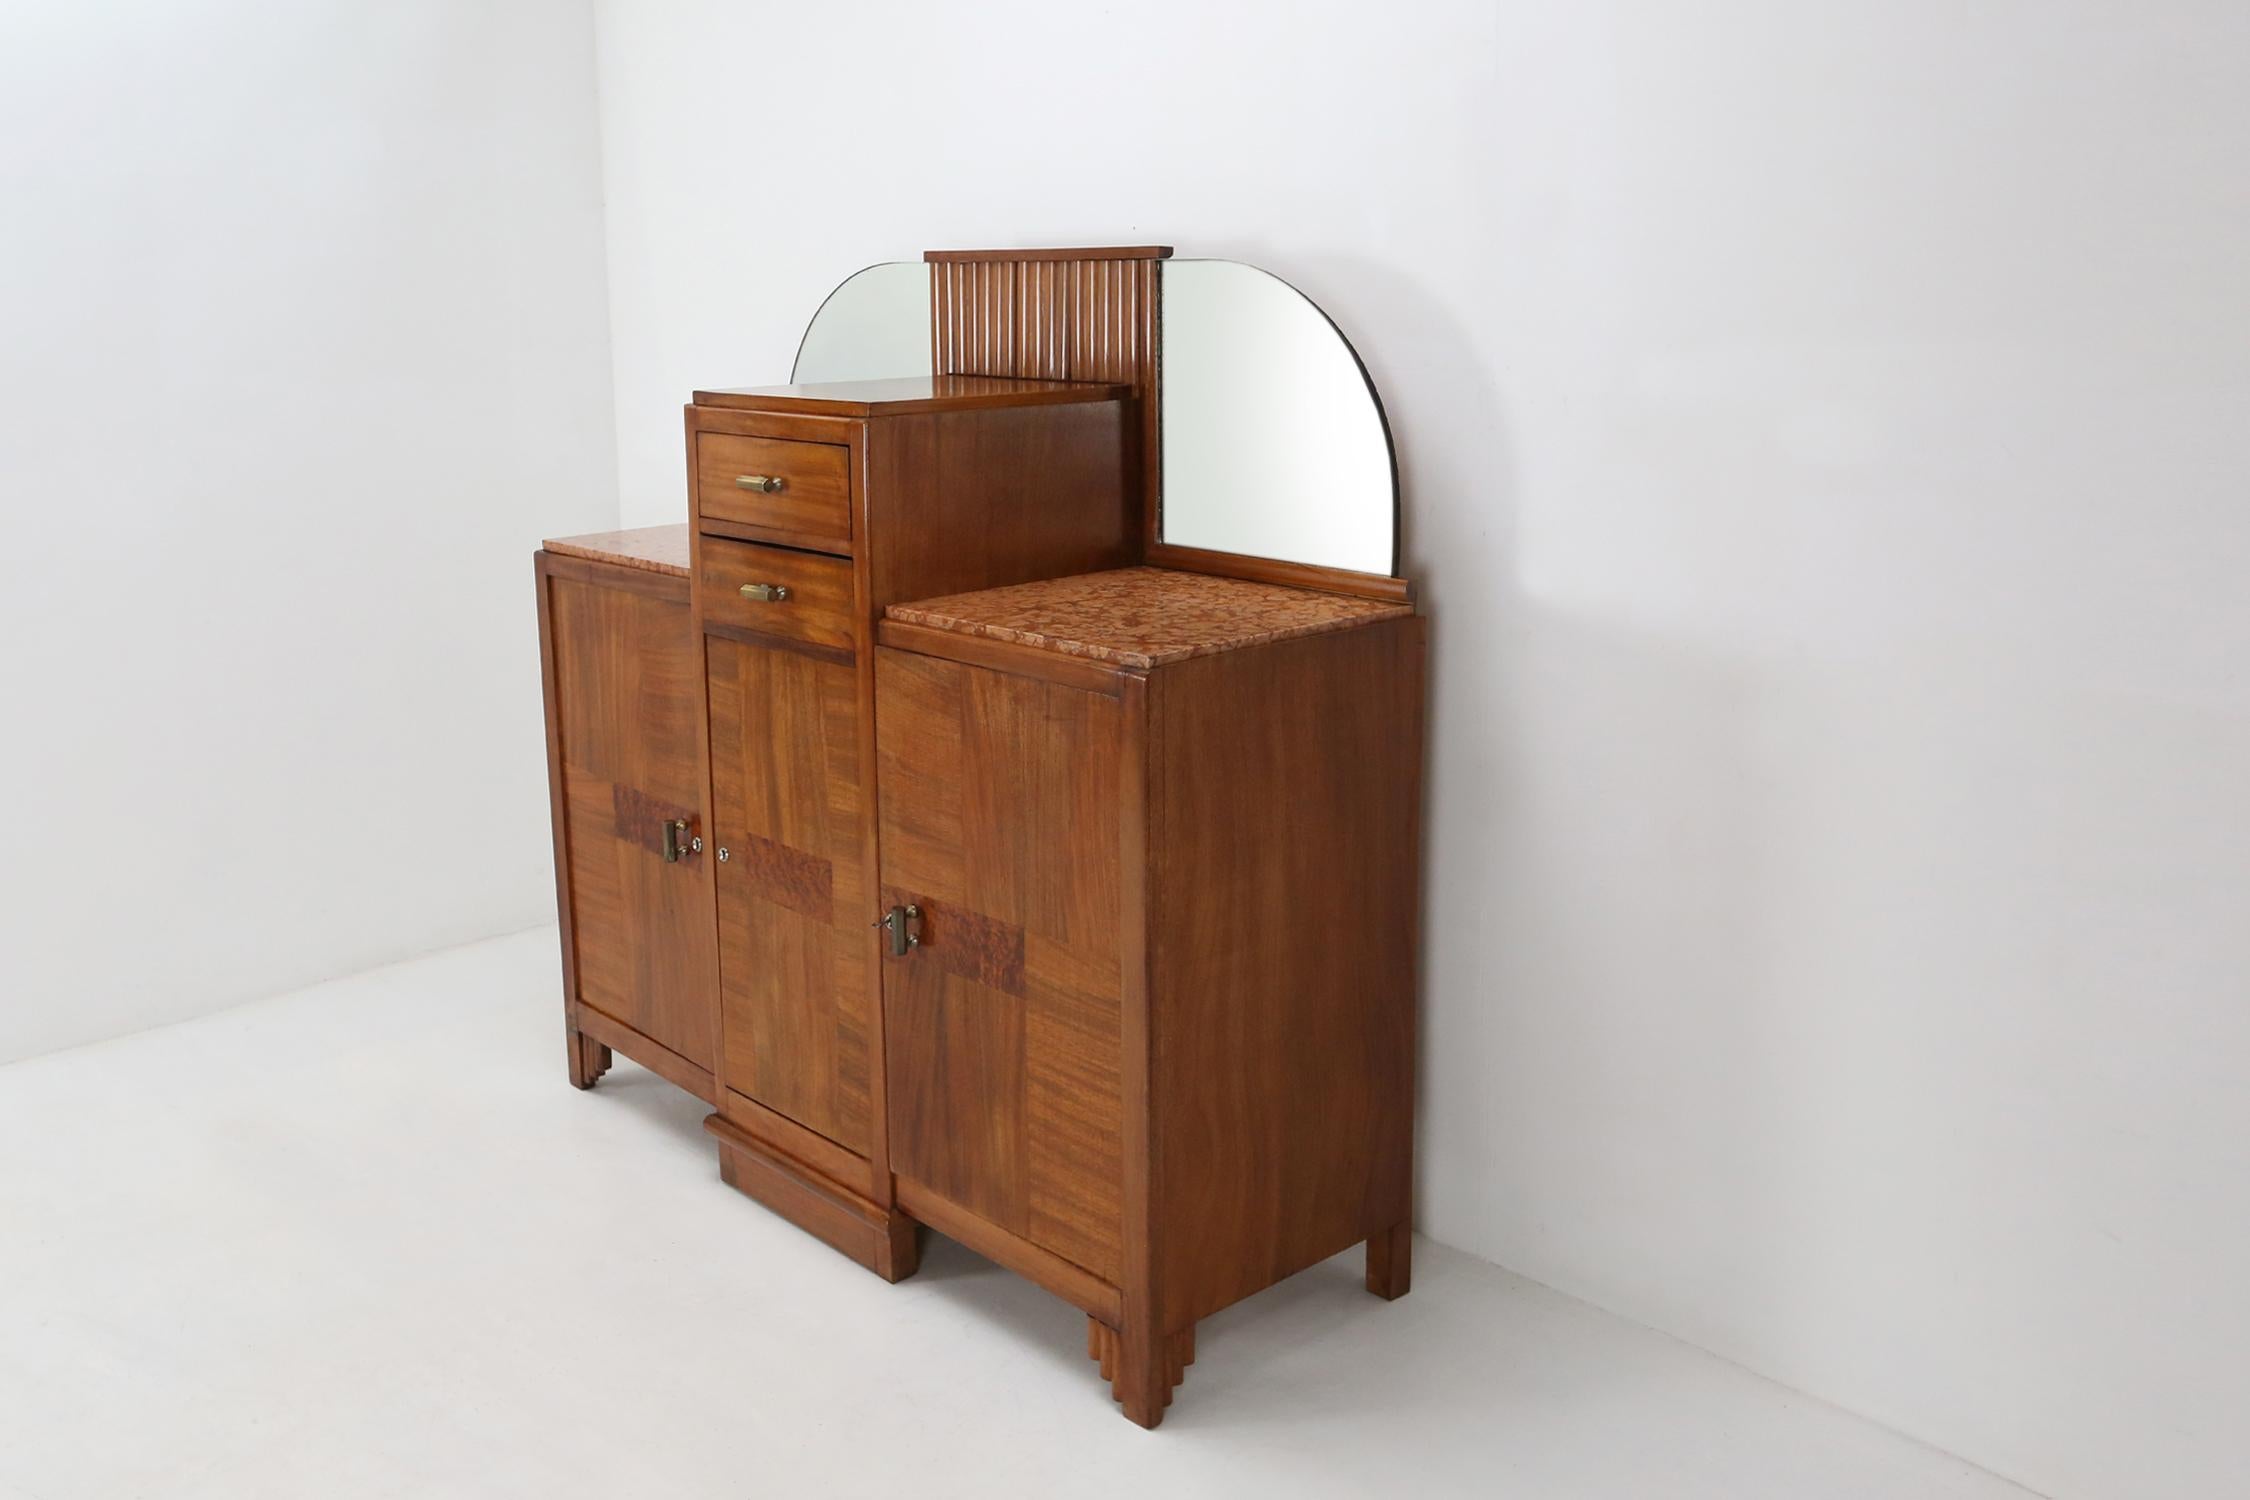 Belgian Art Deco cabinet made around 1930.
Has some great geometric details. Mirrors on two sides and a marble top.